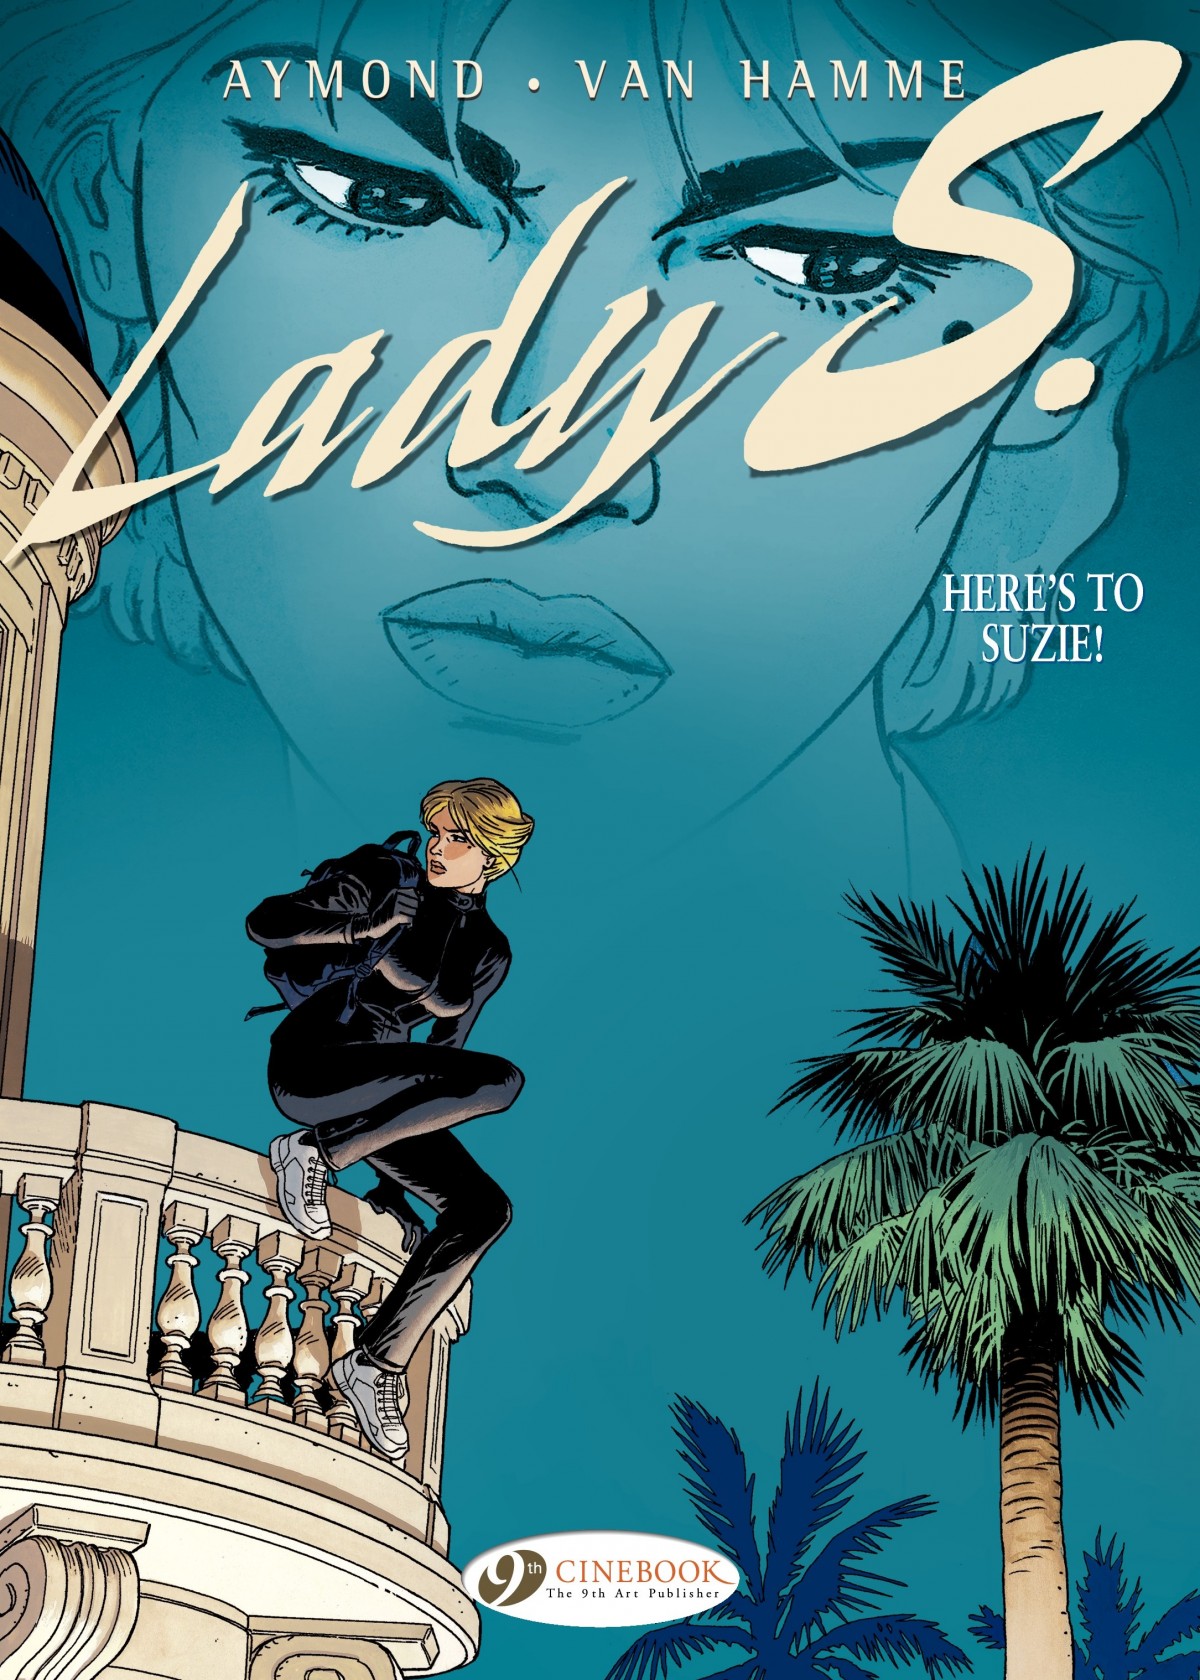 Read online Lady S. comic -  Issue # TPB 1 - 1